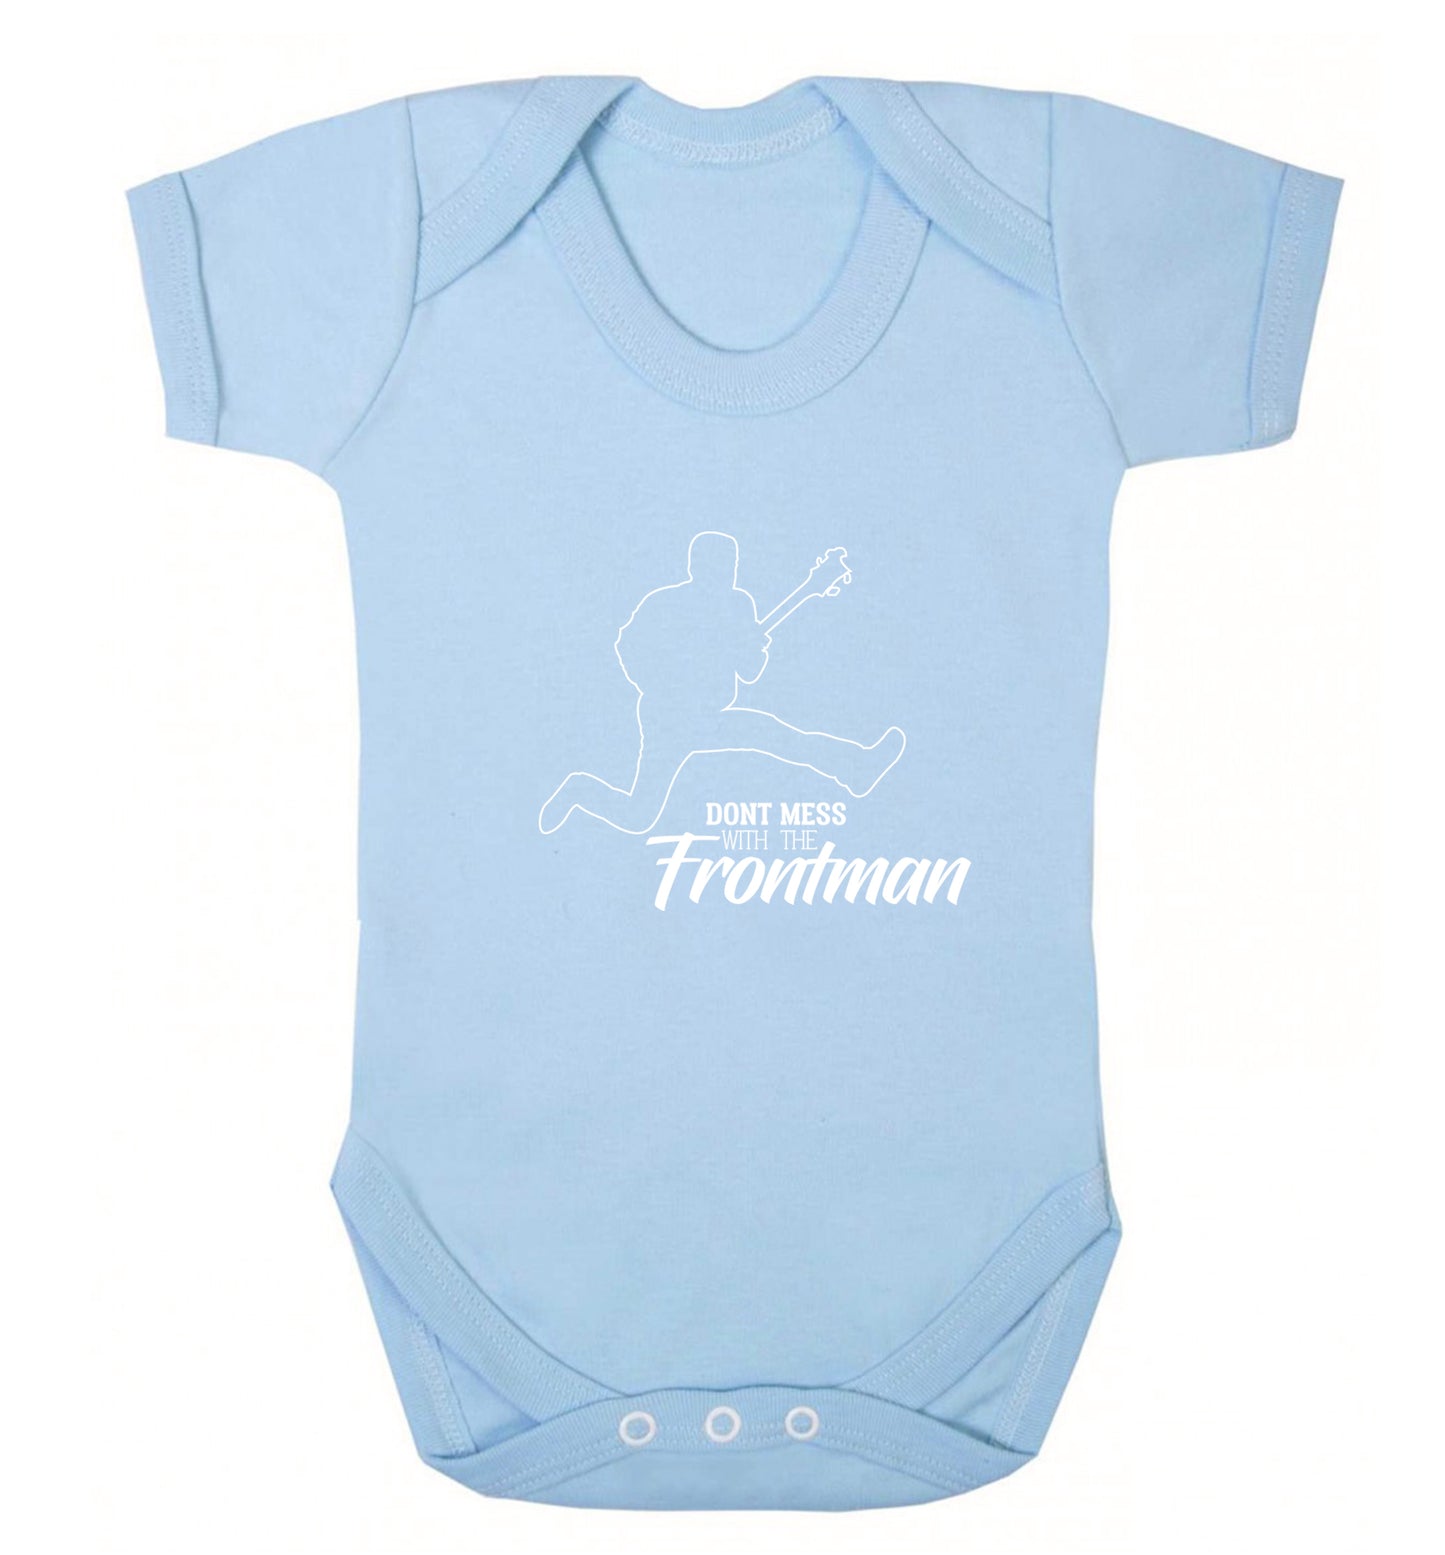 Don't mess with the frontman Baby Vest pale blue 18-24 months